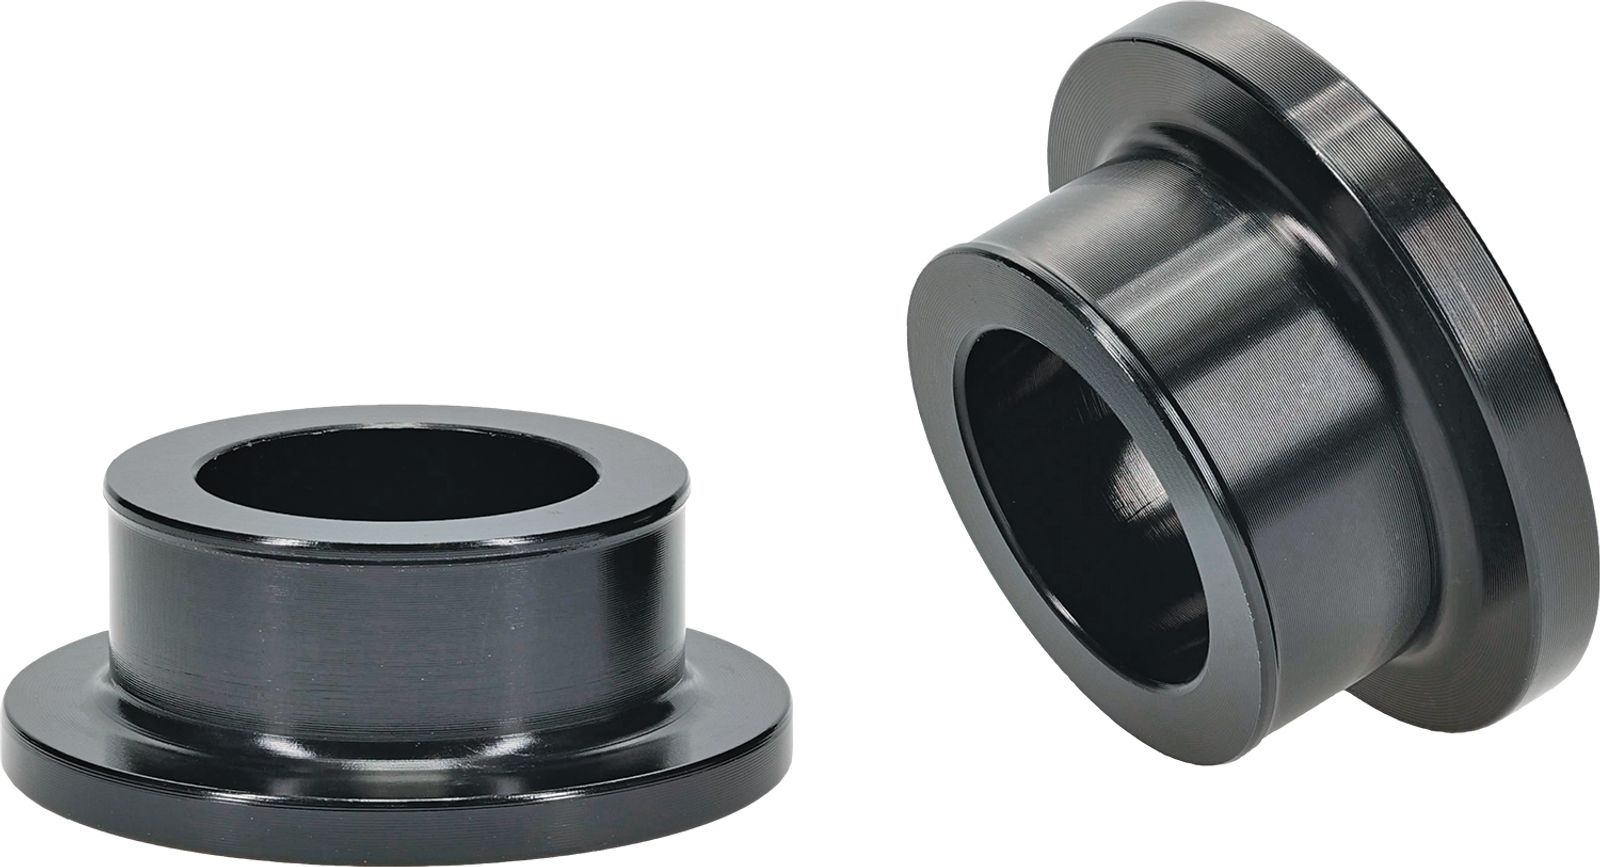 Wrp Rear Wheel Spacer Kits - WRP111047-1 image